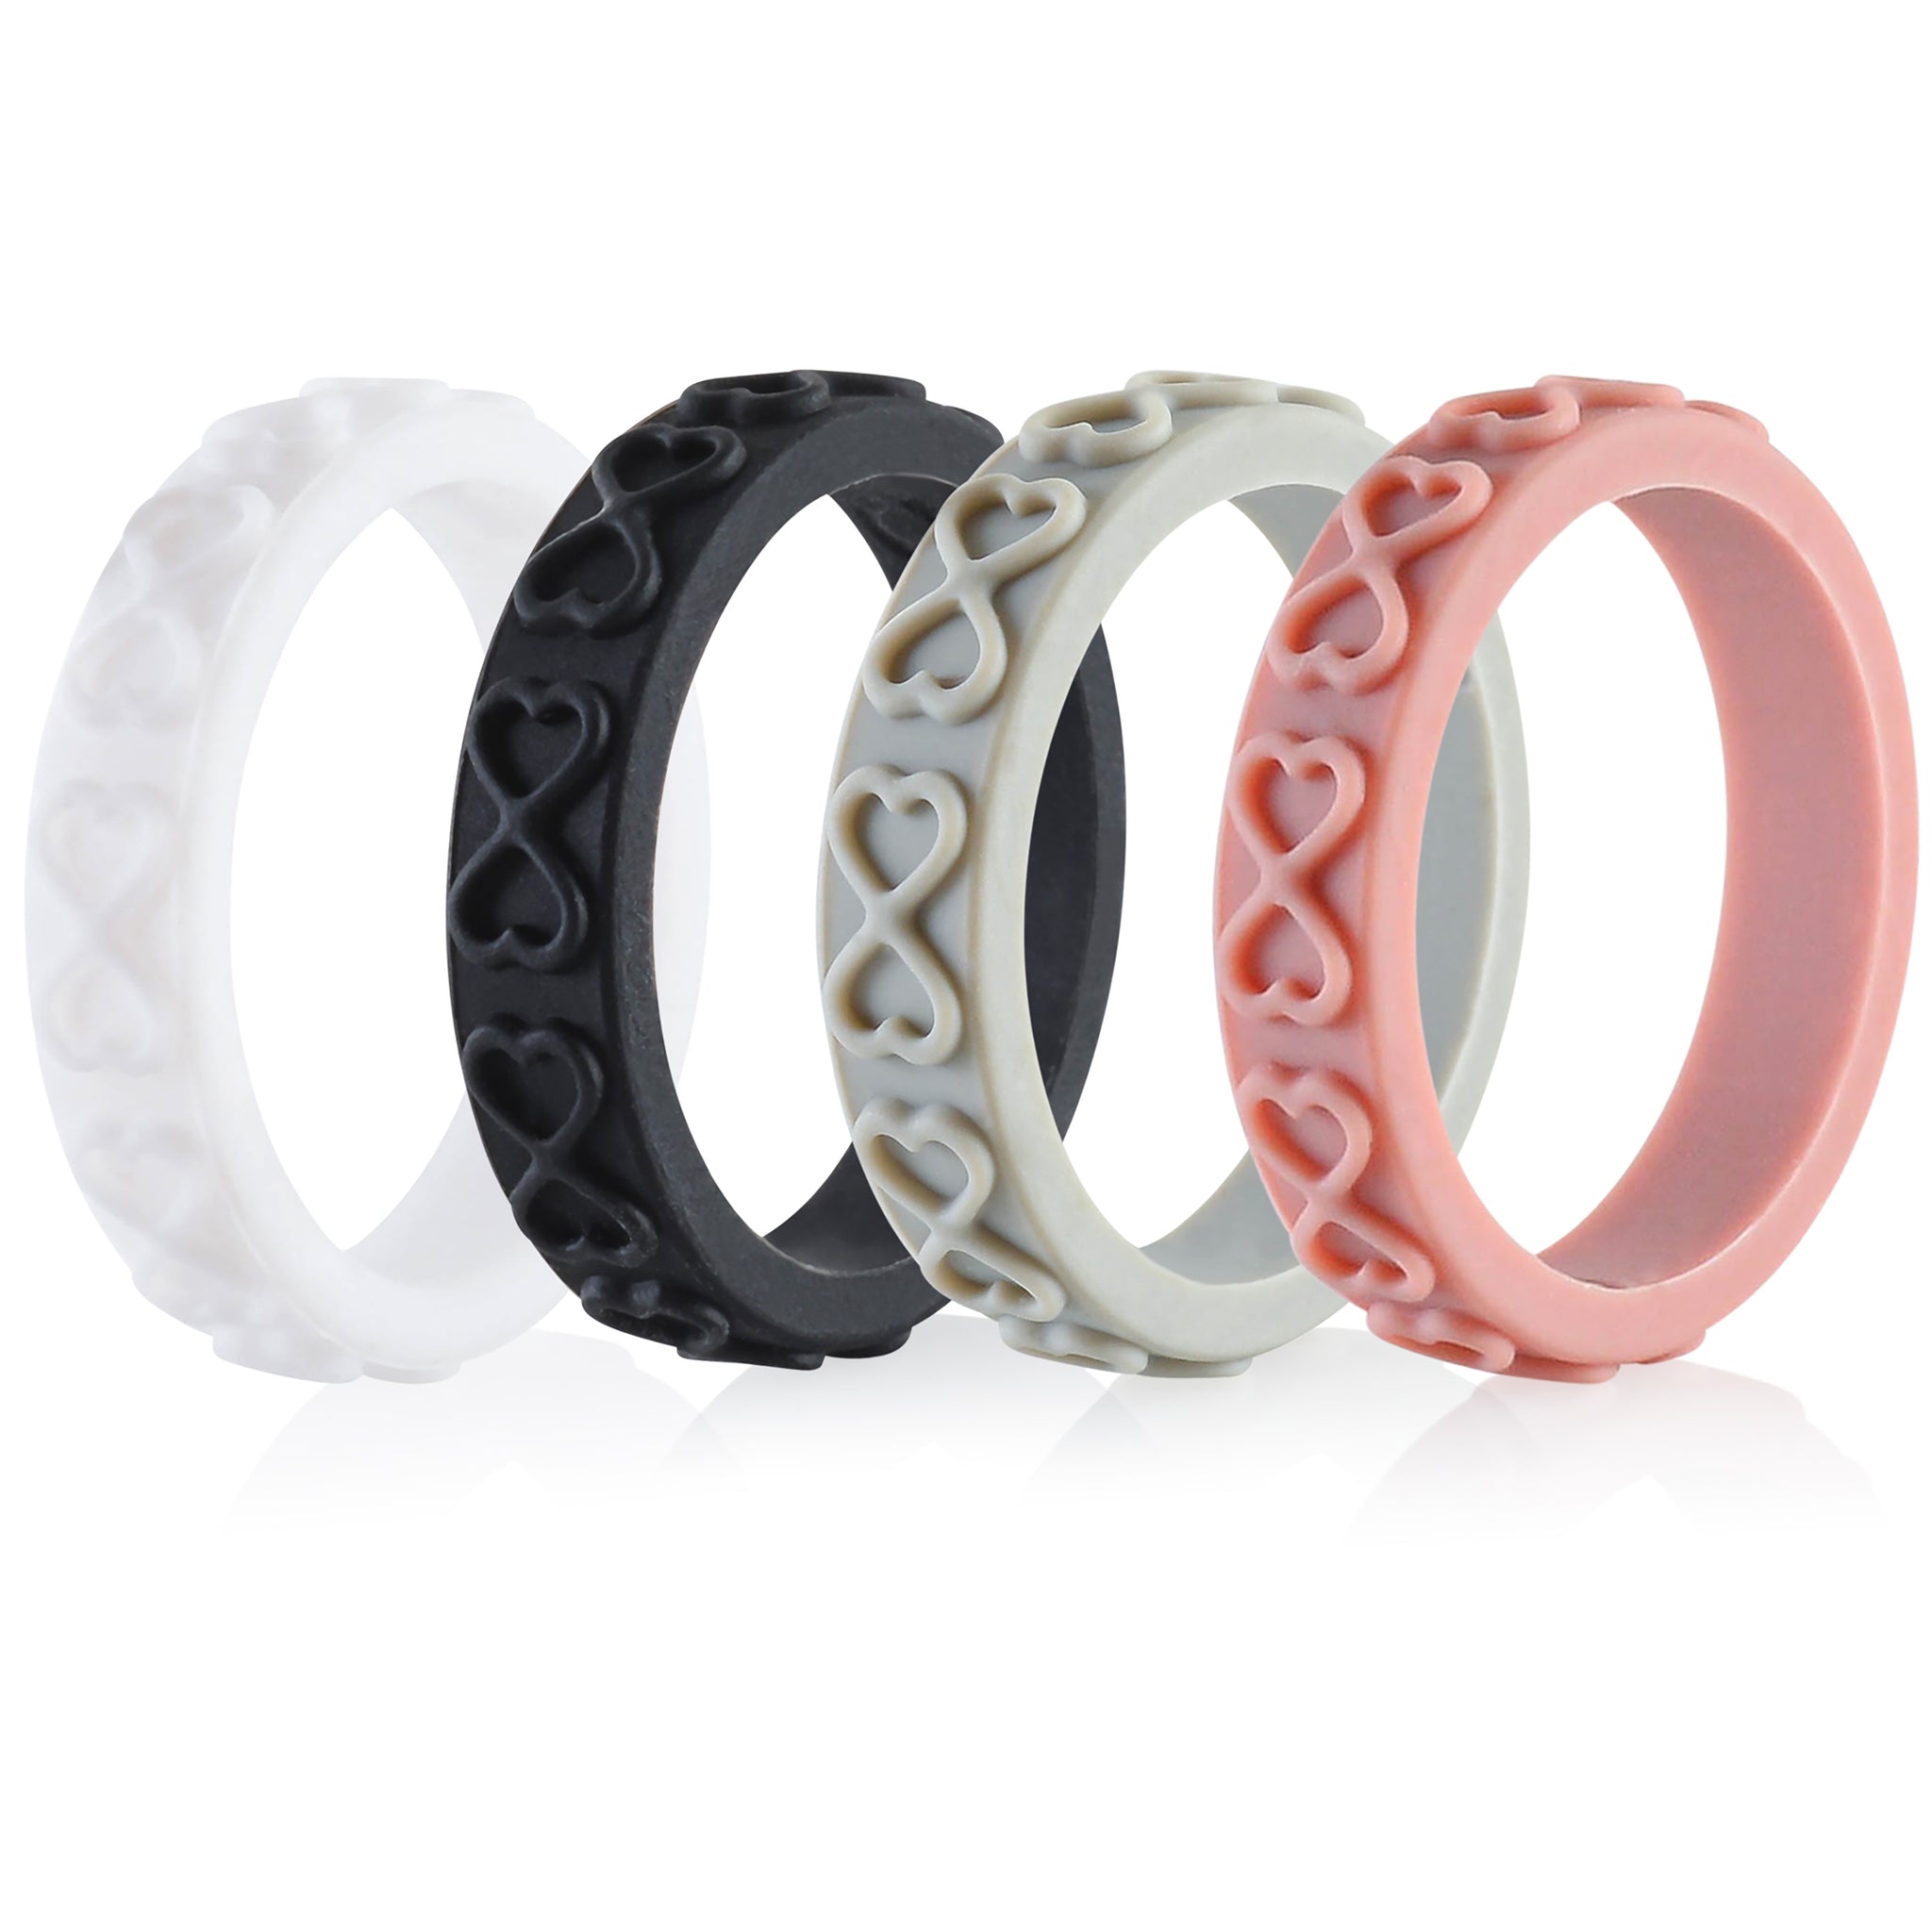 Enso Rings Launches Chic and Practical Silicone Wedding Rings for